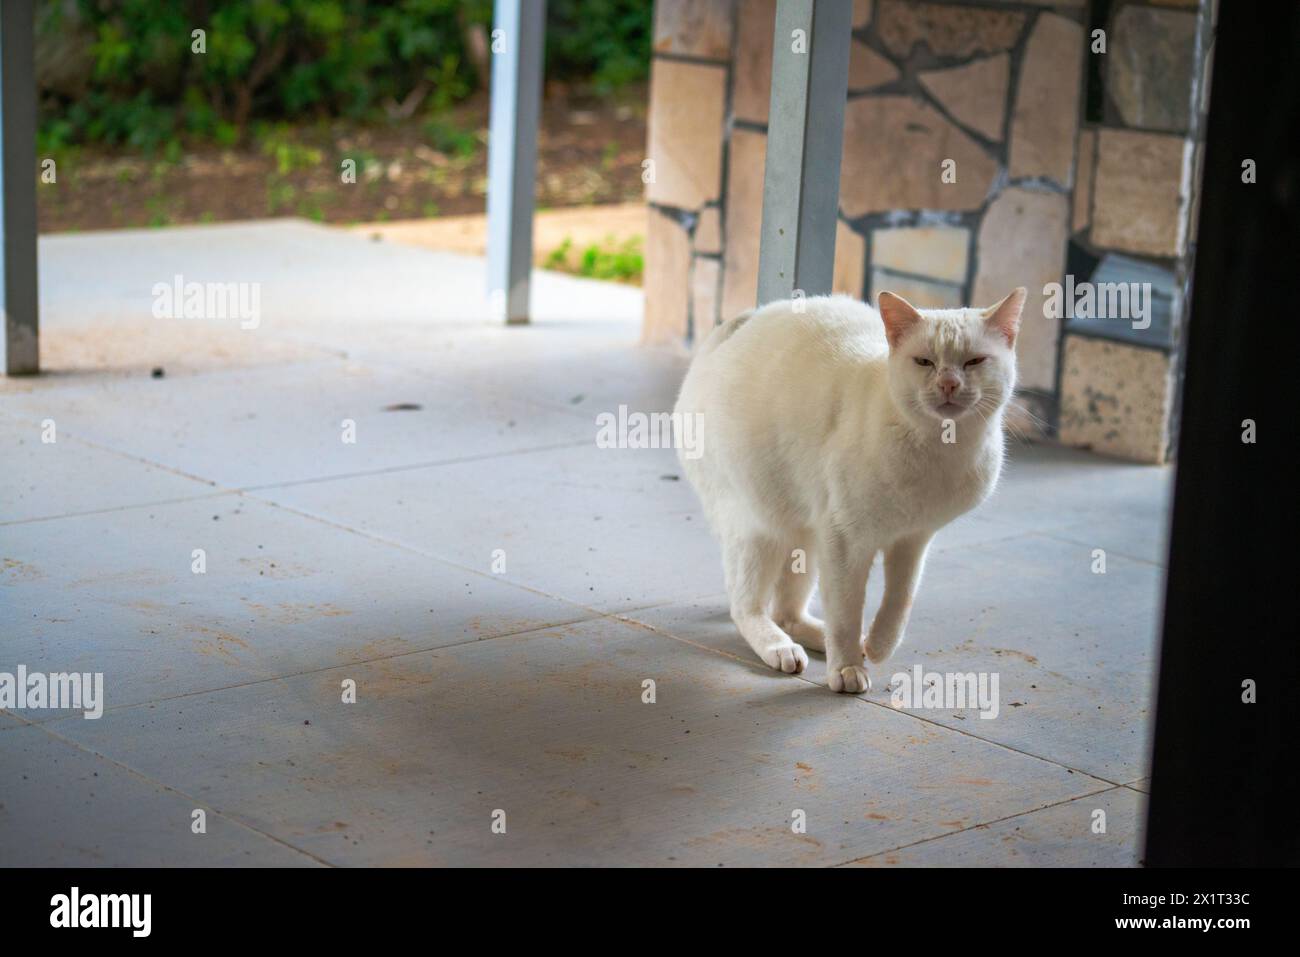 In a blizzard of fury, the white cat stands aggressively on the ground, ready for battle, hissing and snarling. Stock Photo